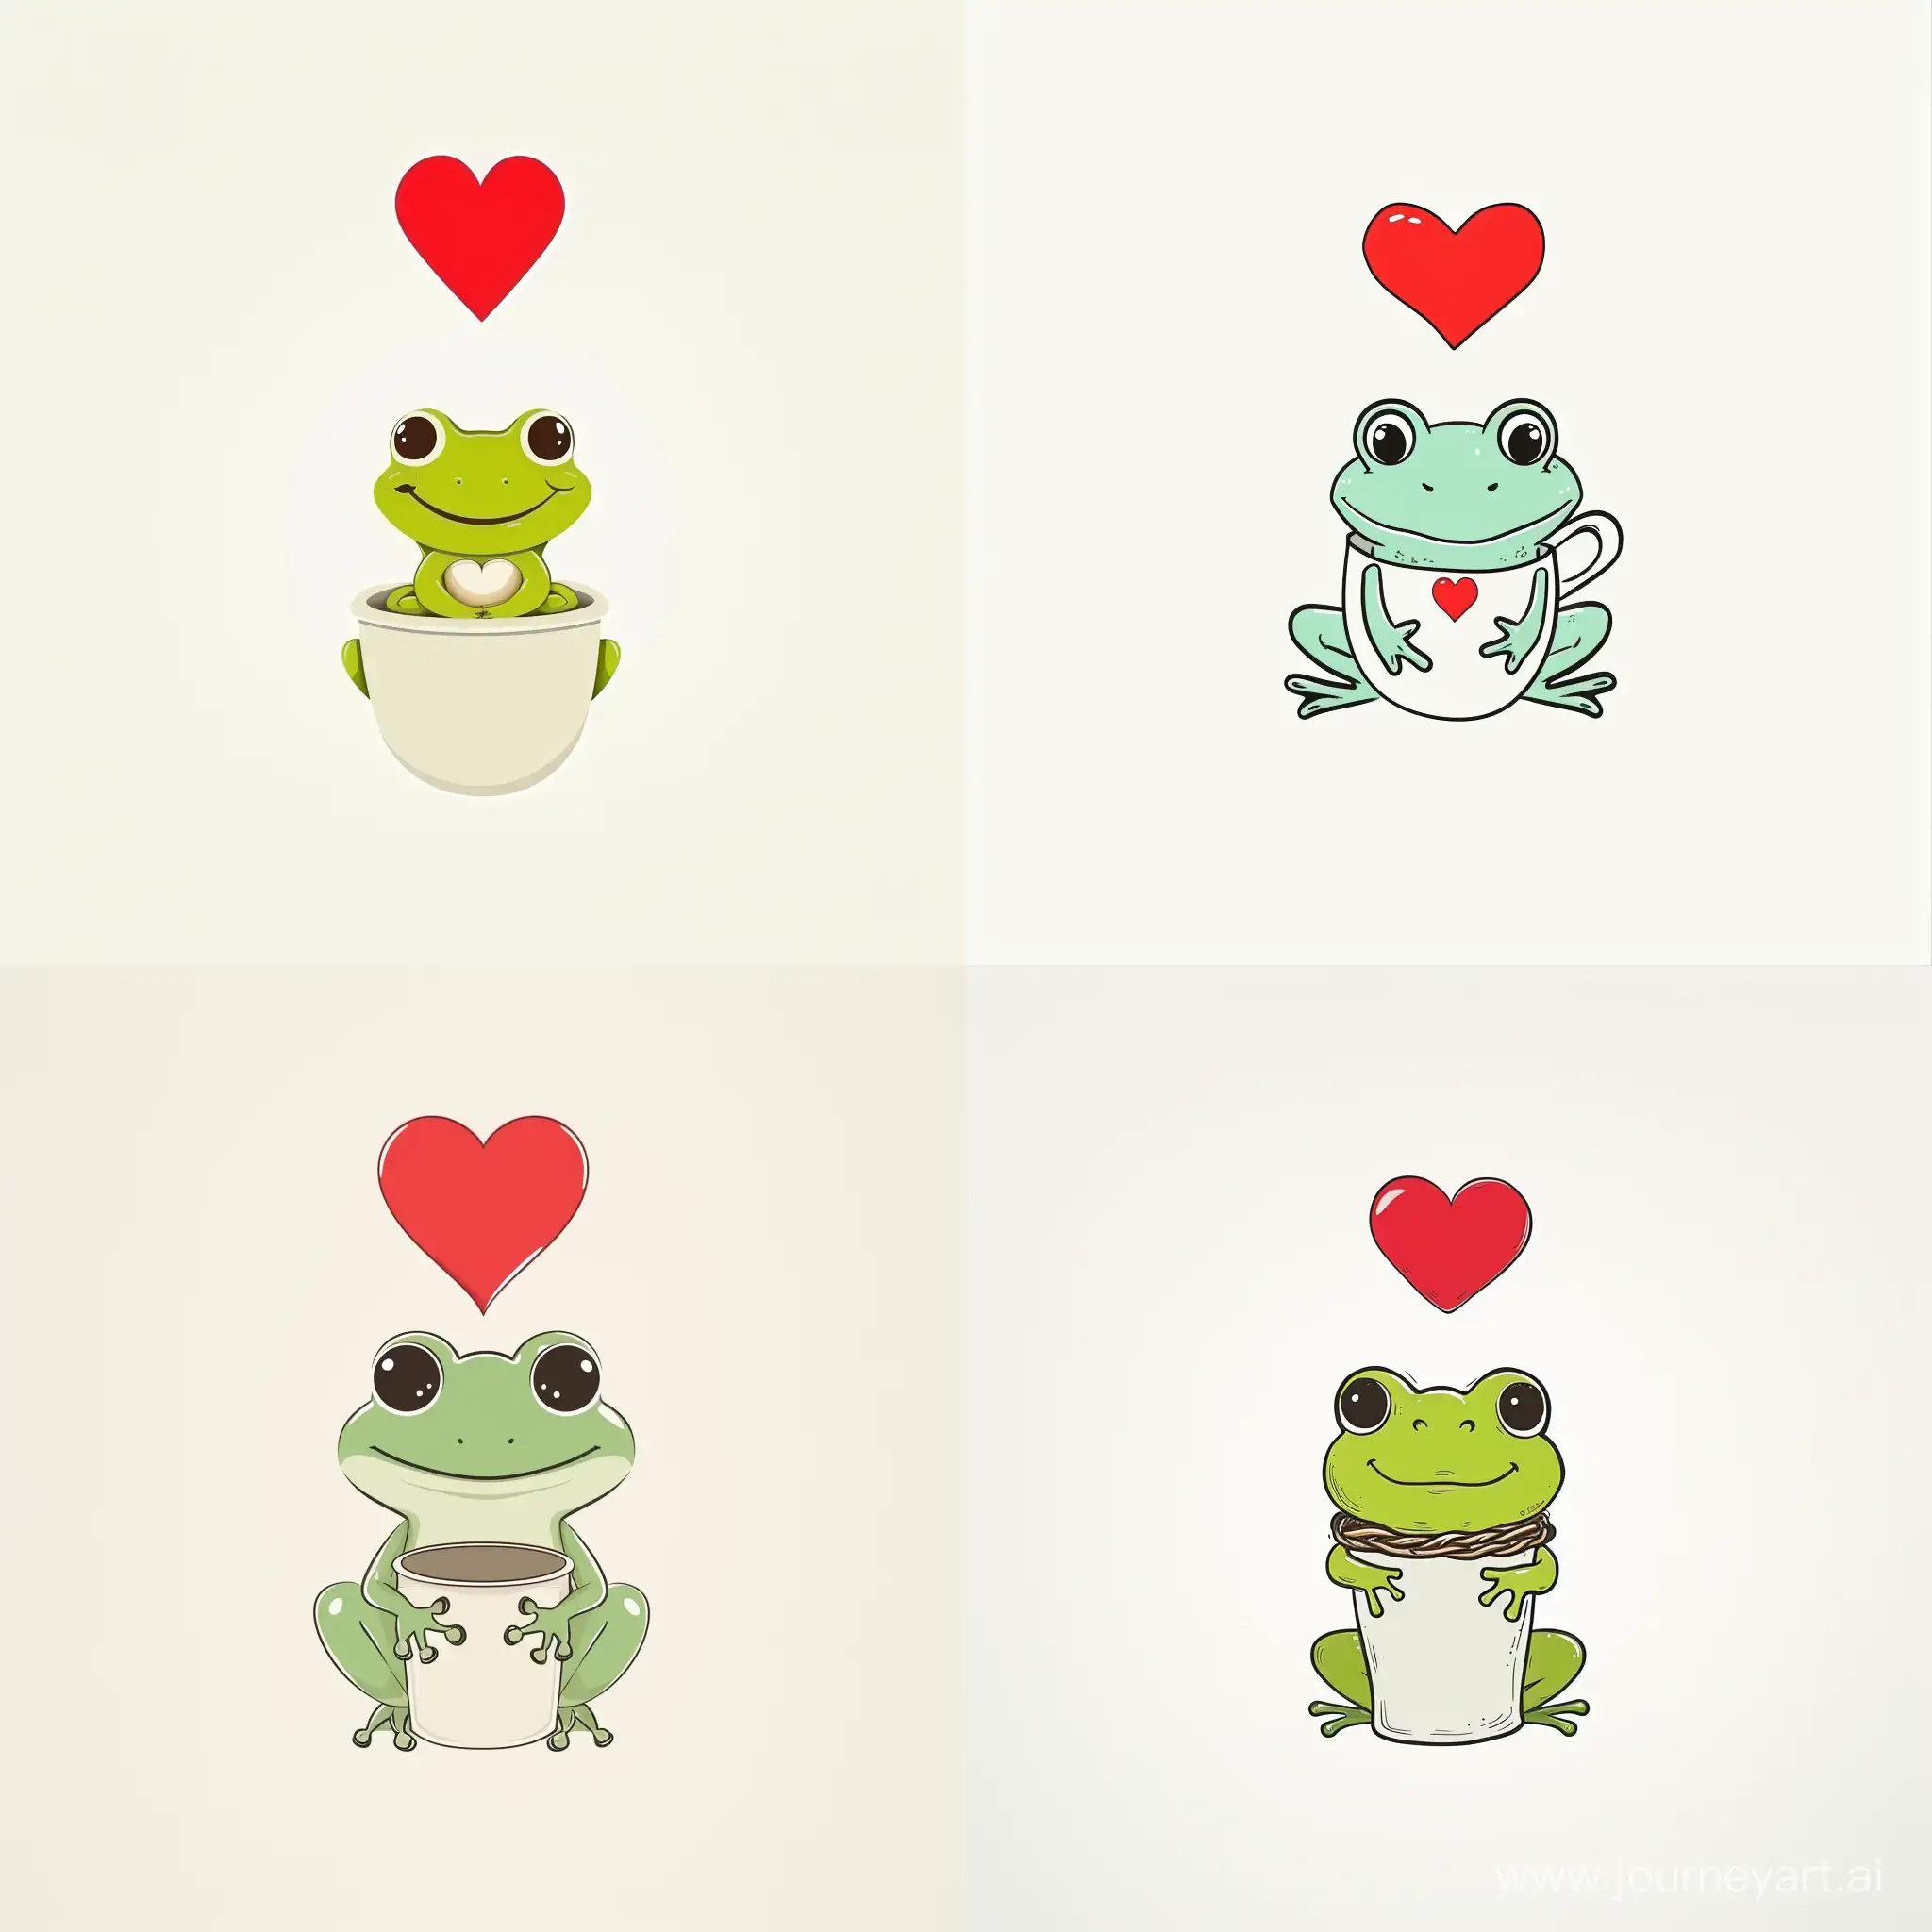 Adorable-Cartoon-Green-Frog-in-a-Cup-with-a-Heart-on-a-White-Background